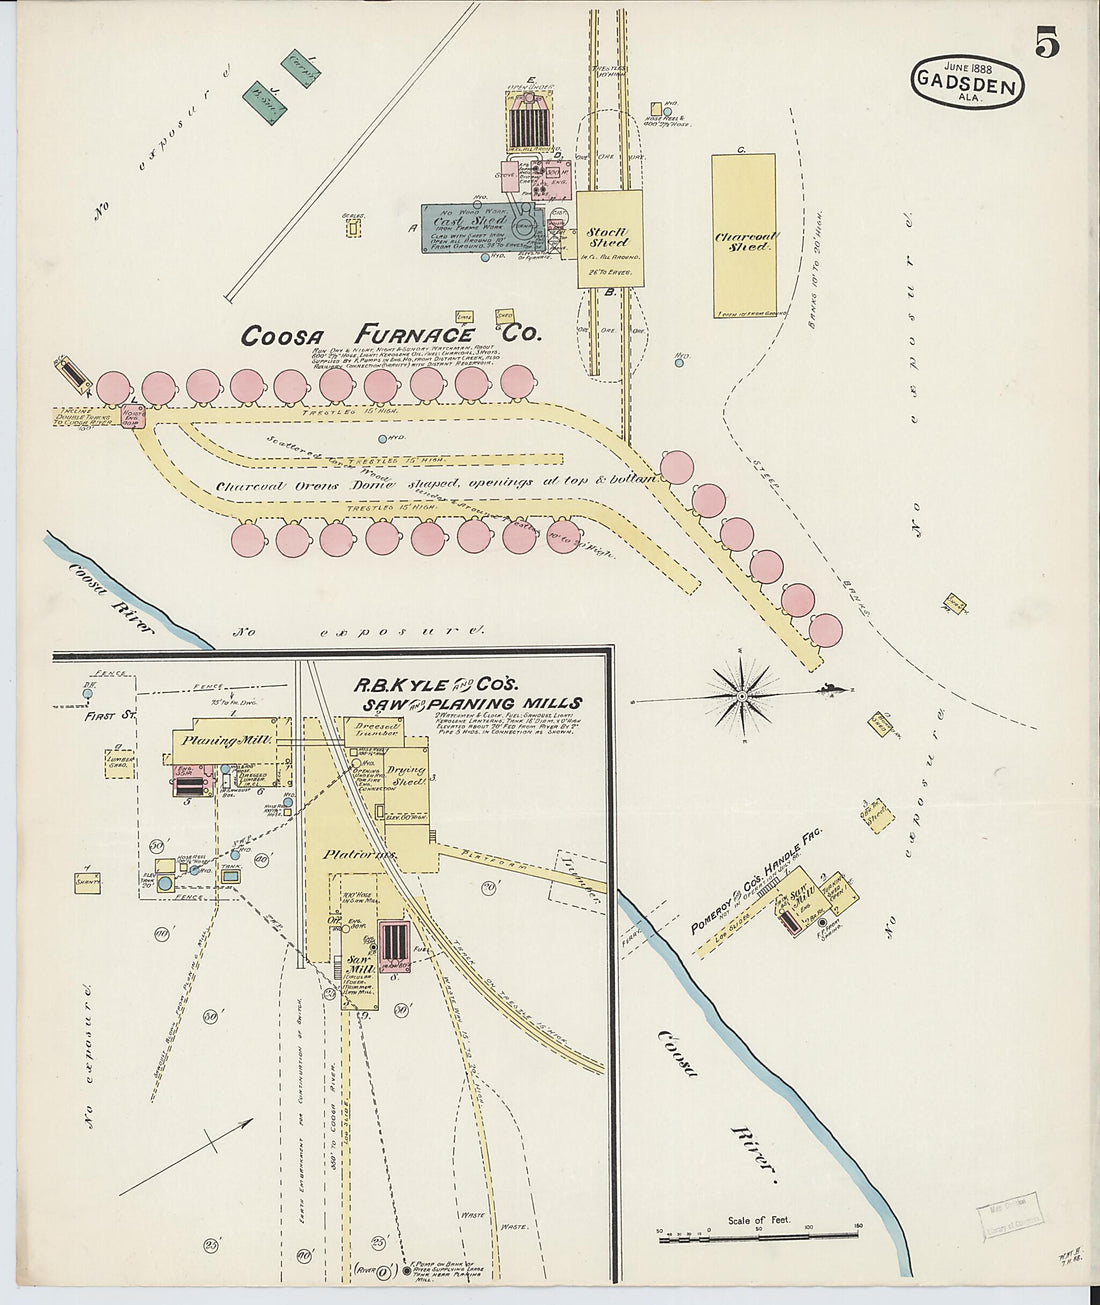 This old map of Gadsden, Etowah County, Alabama was created by Sanborn Map Company in 1888